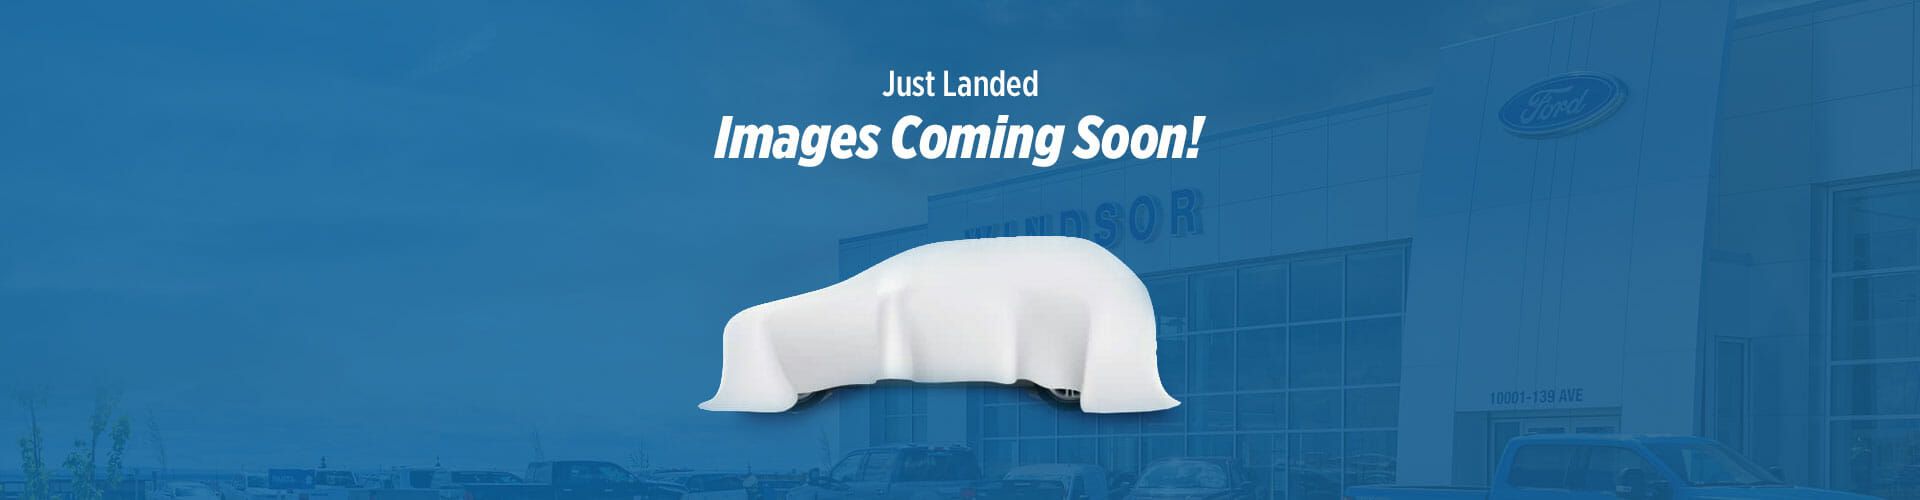 2018 Ford Fusion Photos Coming Soon